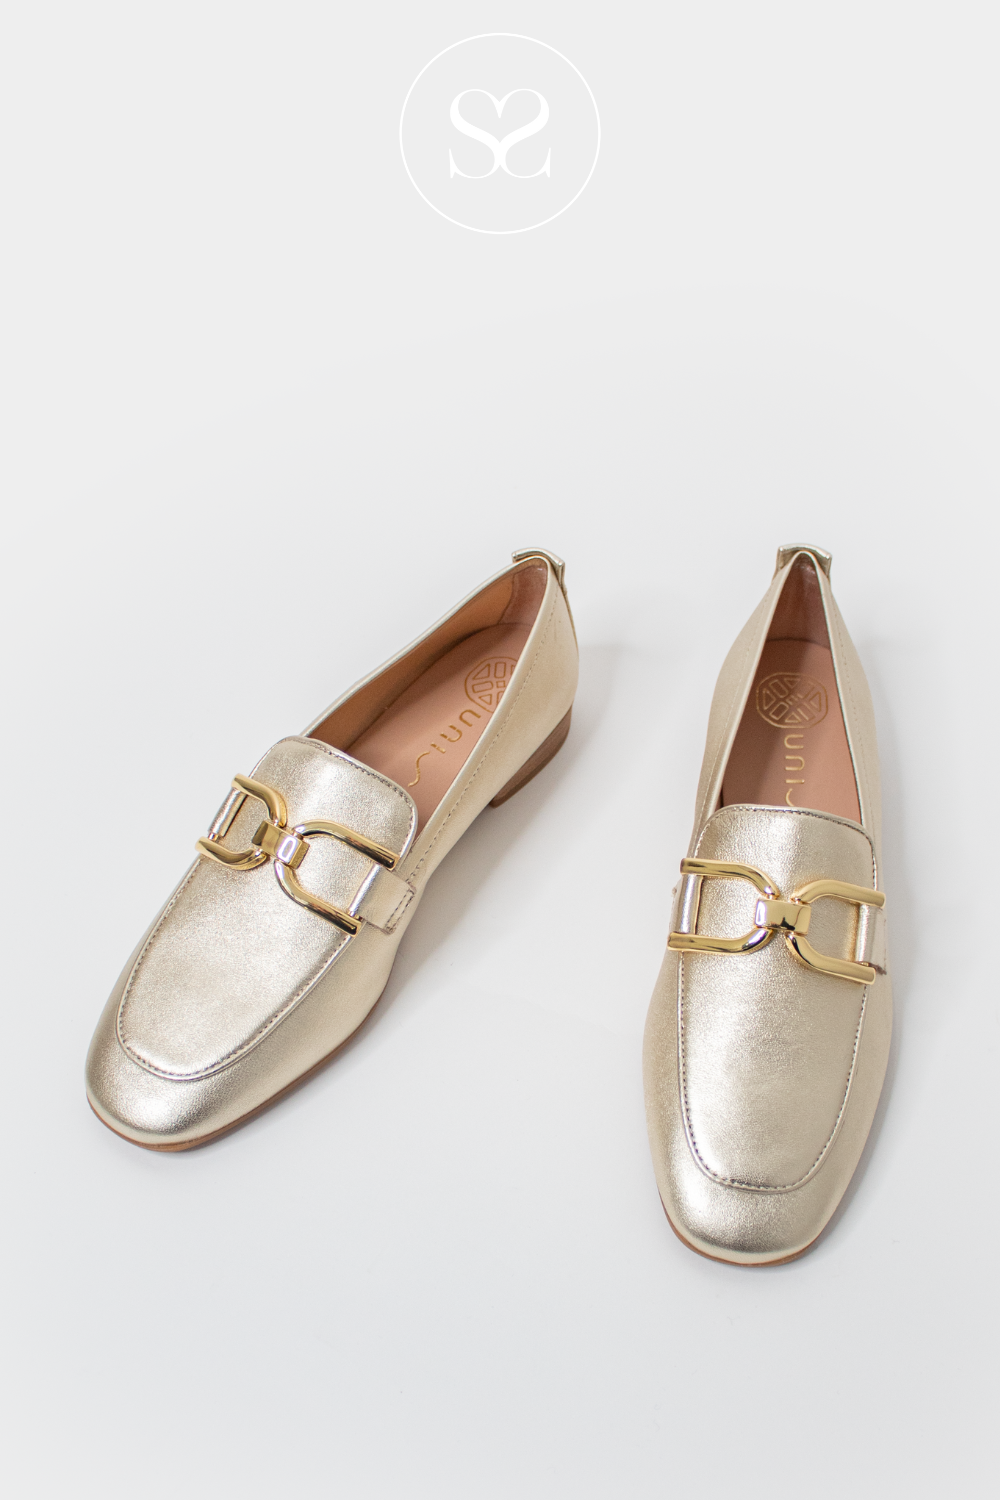 UNISA BAXTER GOLD LEATHER FLAT SLIP ON LOAFERS WITH GOLD BUCKLE